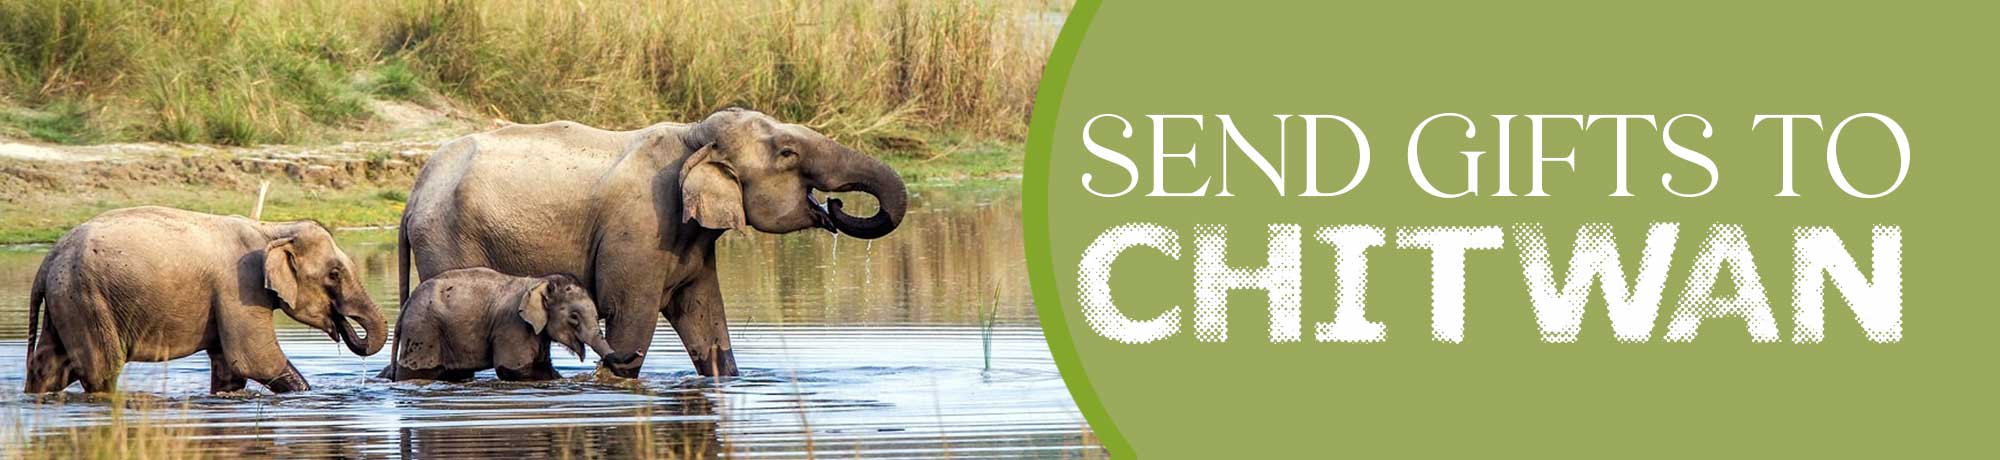 Send gifts to Chitwan